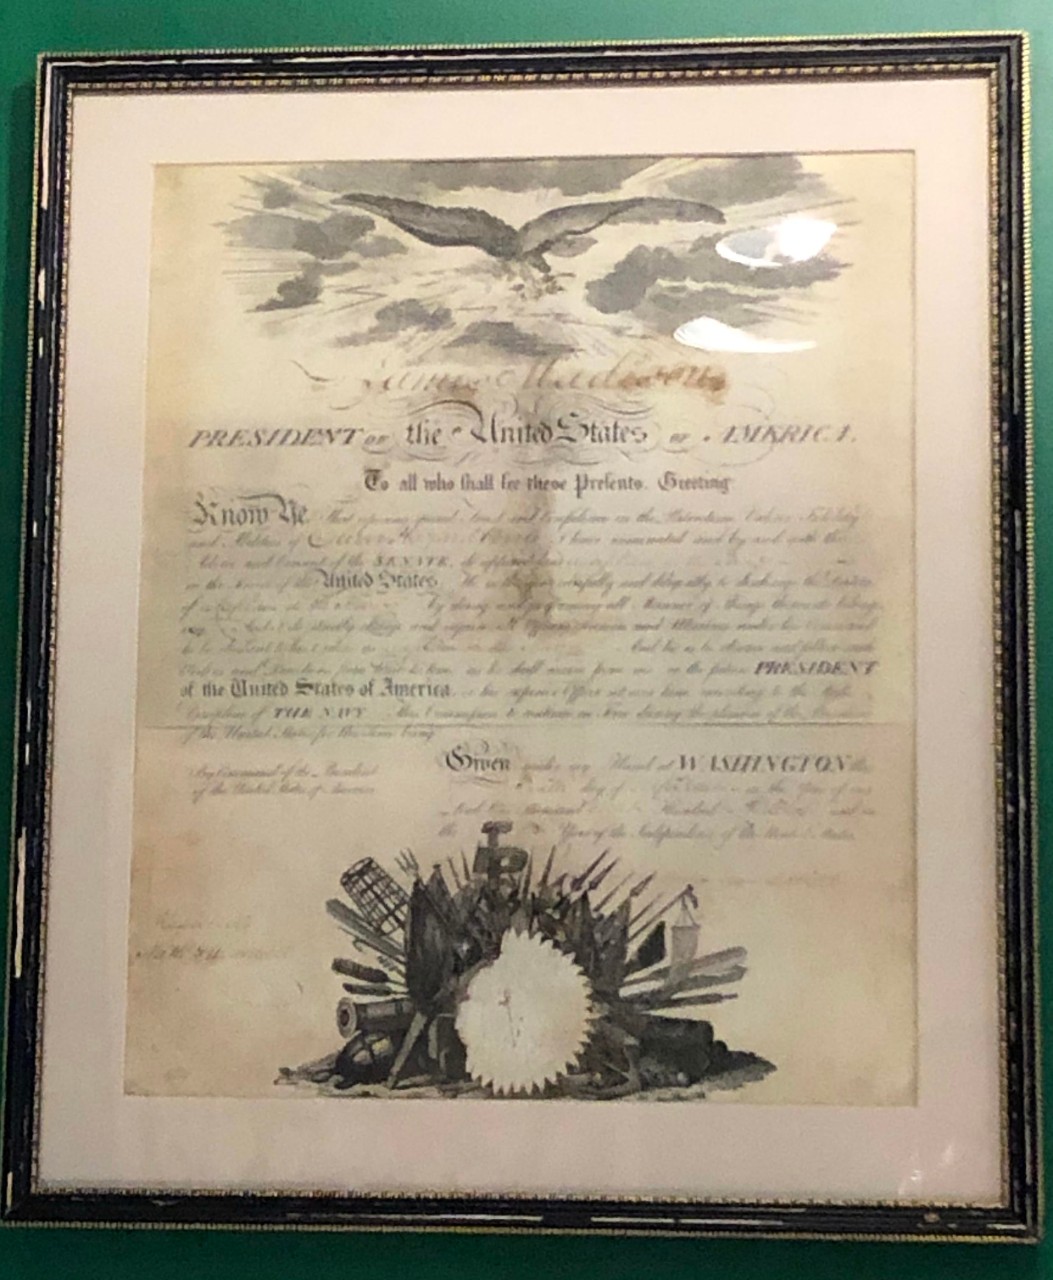 Oliver Hazard Perry’s Commission to the United States Navy, signed by President James Madison.  Accession # 82-204-F.